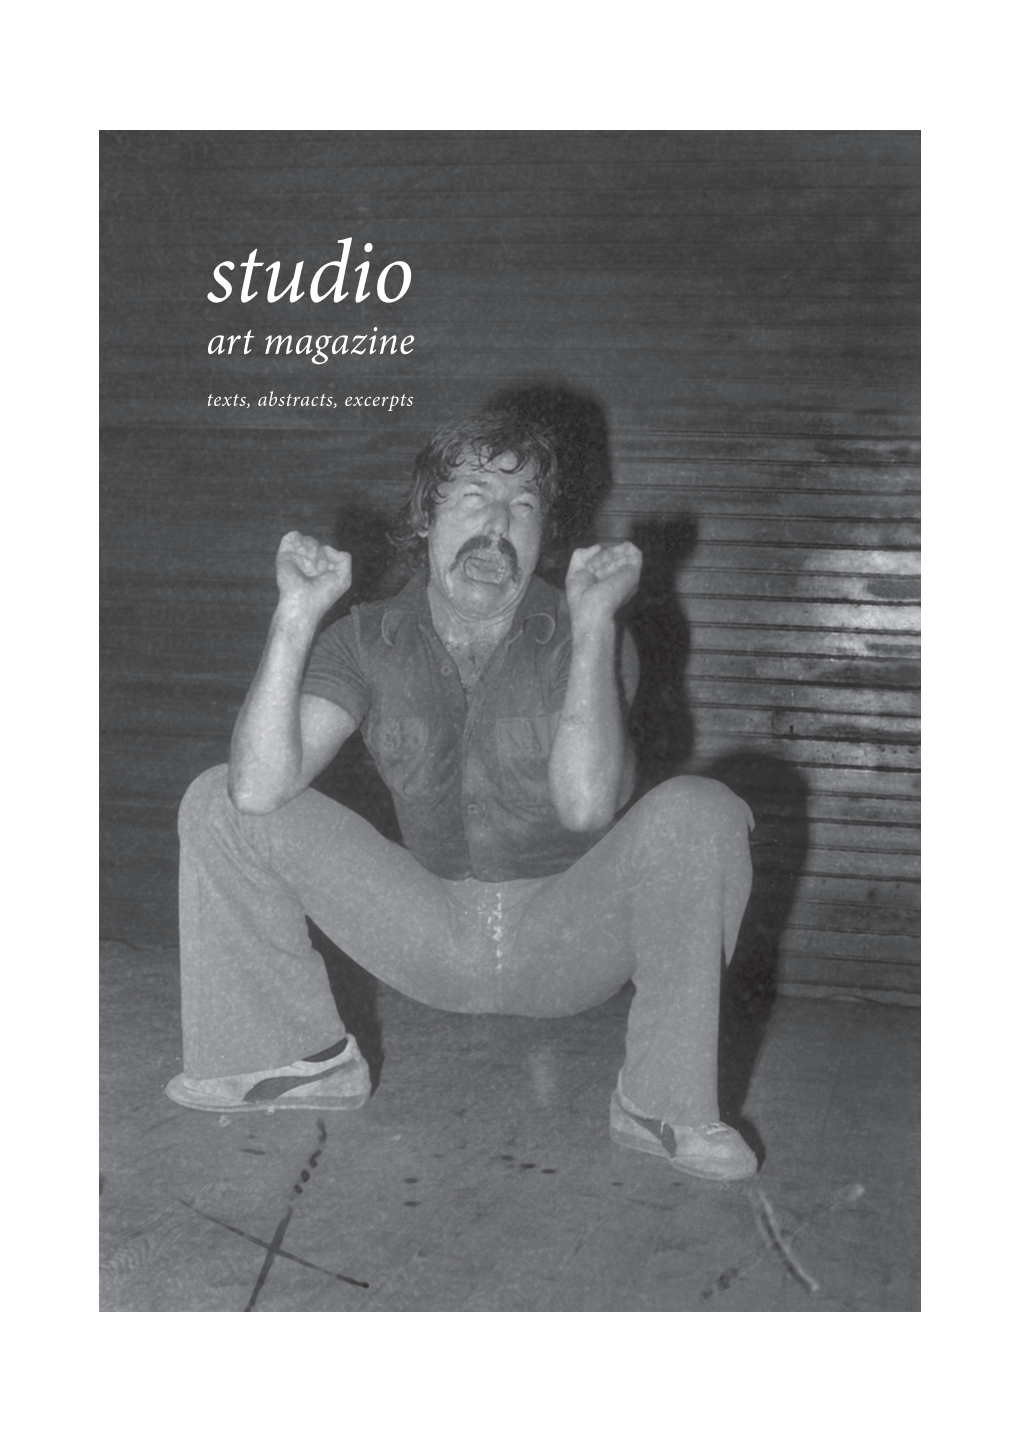 Studio Art Magazine Texts, Abstracts, Excerpts Front and Back Covers: Avi Dayan, Jocko Arkin, 1975 � ���������������������������������������������������